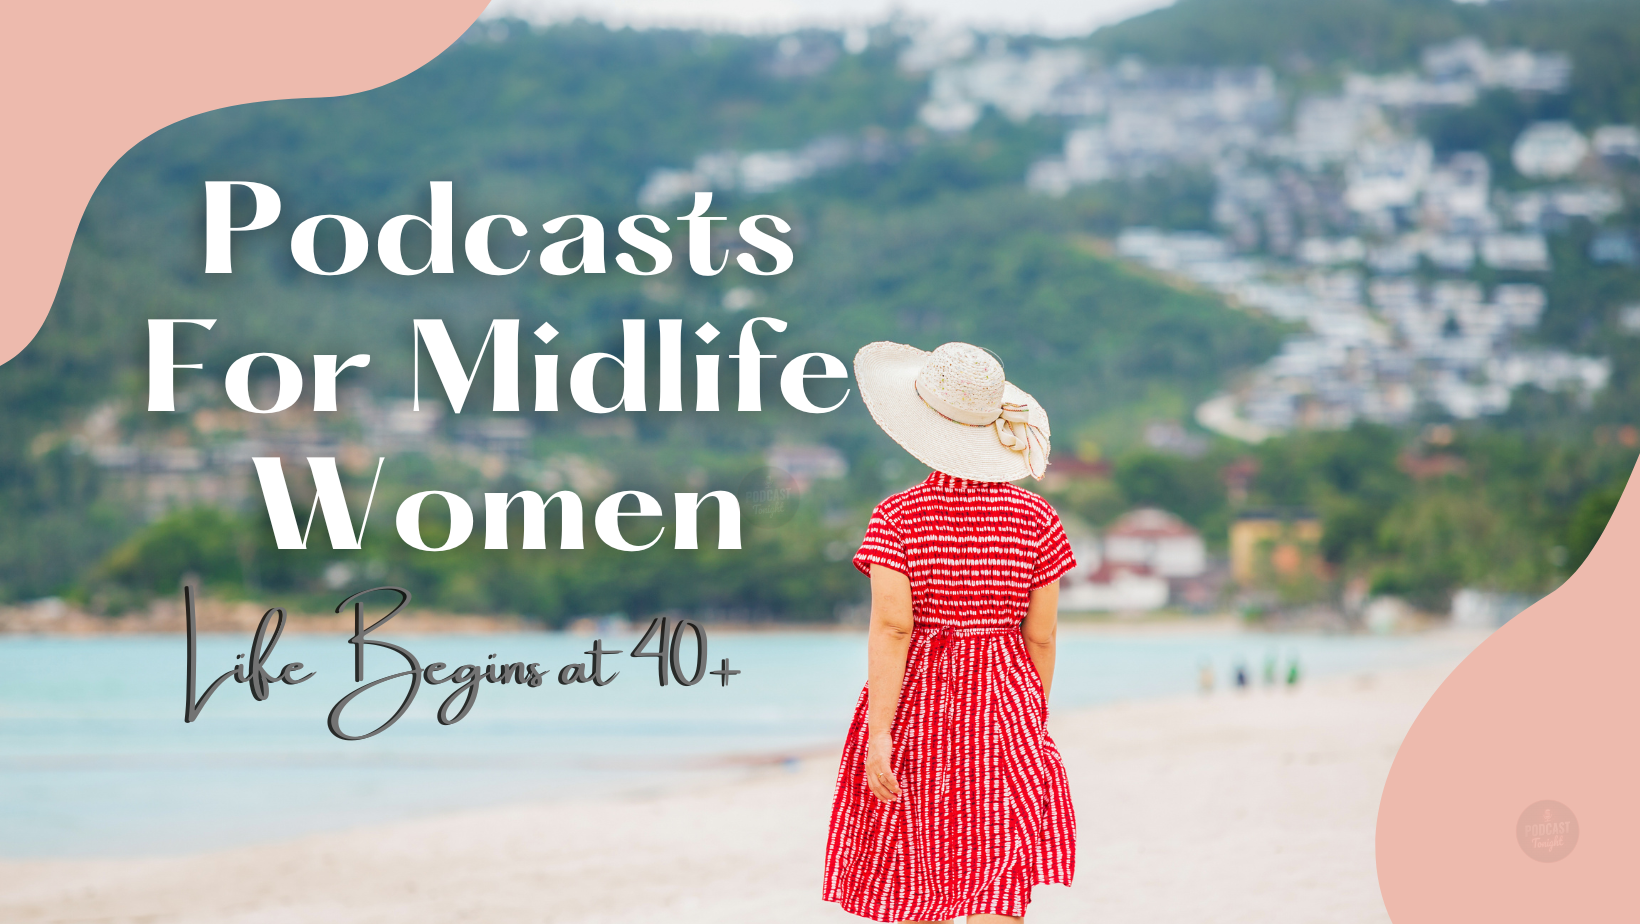 Life Begins at 40+: Must-Listen Podcasts For Midlife Women